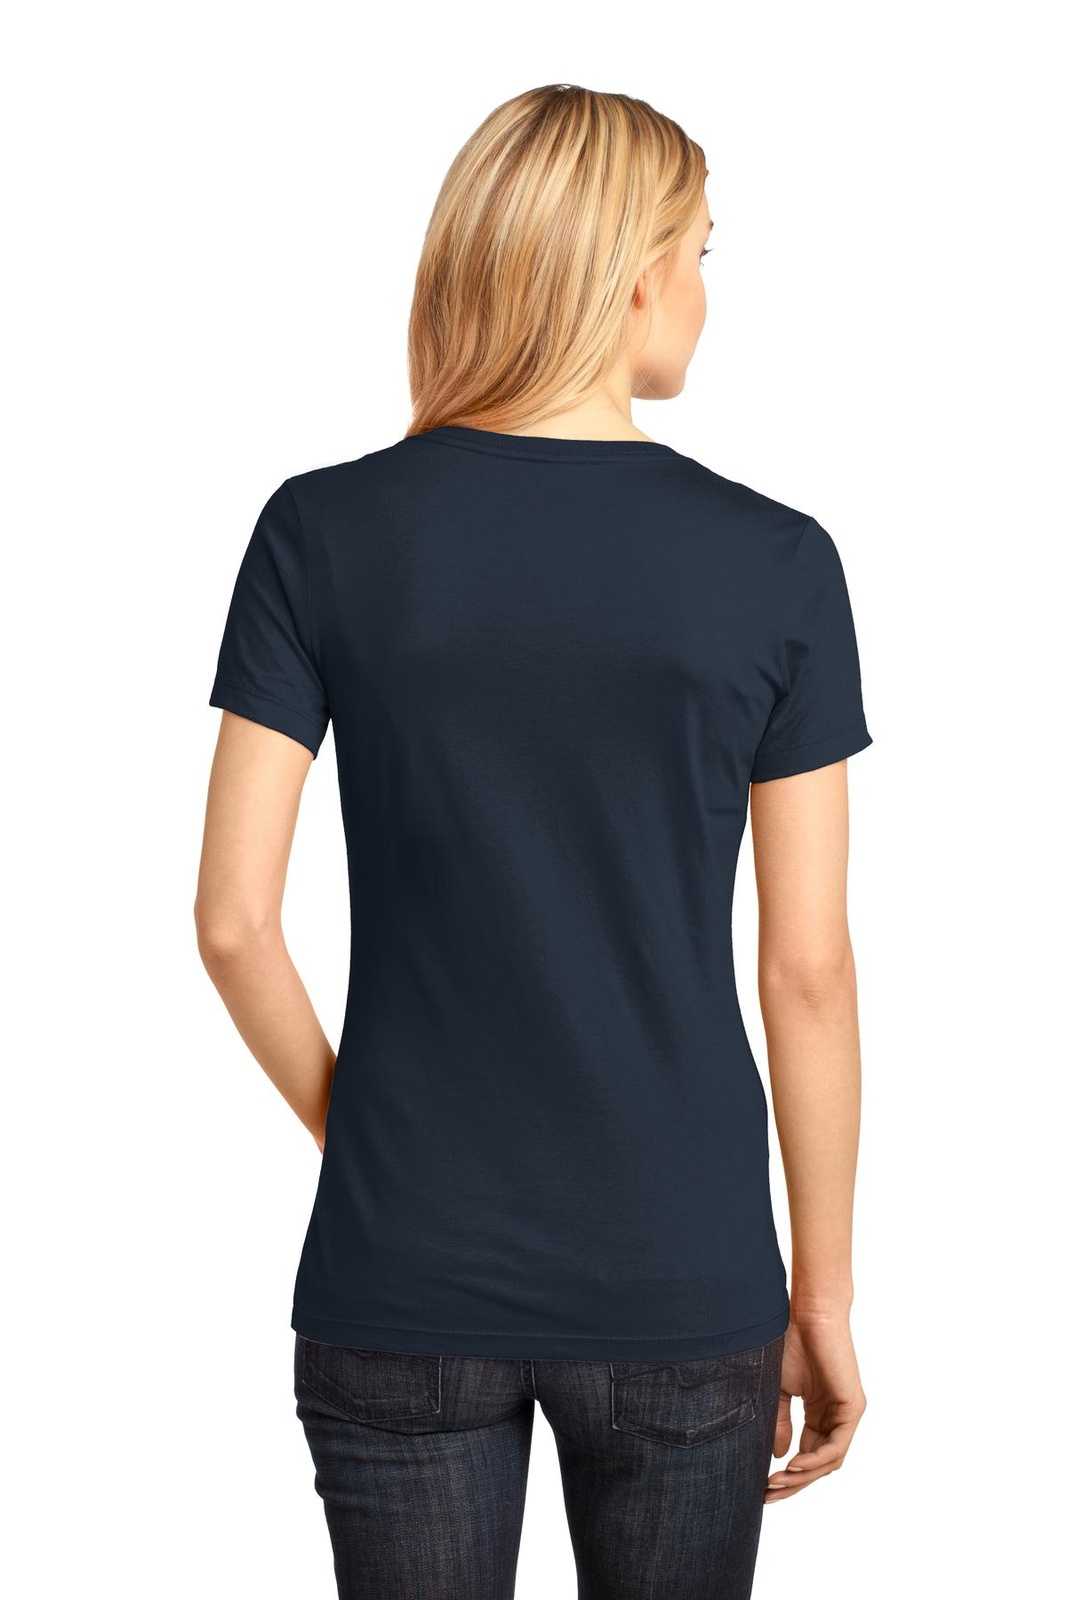 District DM1170L Women's Perfect Weight V-Neck Tee - New Navy - HIT a Double - 1